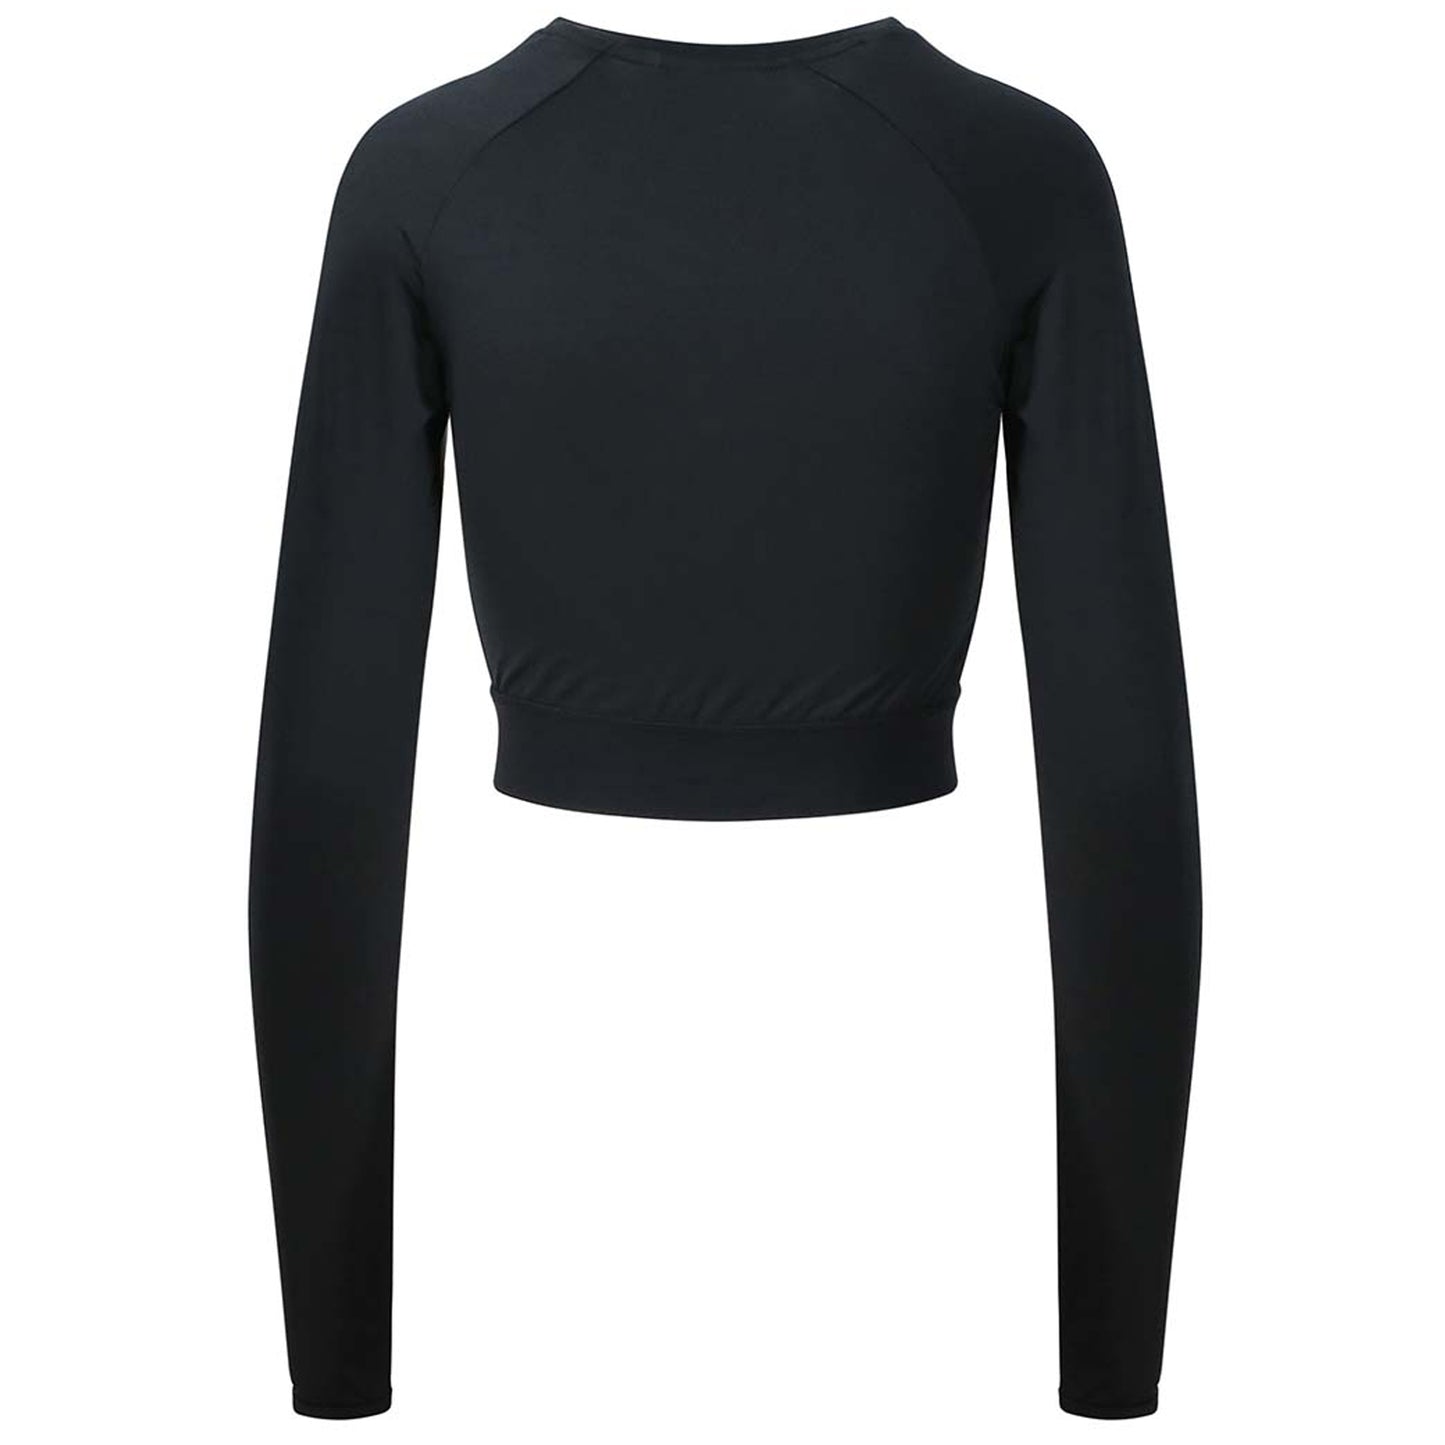 LUCY - "Cool" Technology Long Sleeved Crop Top - Black